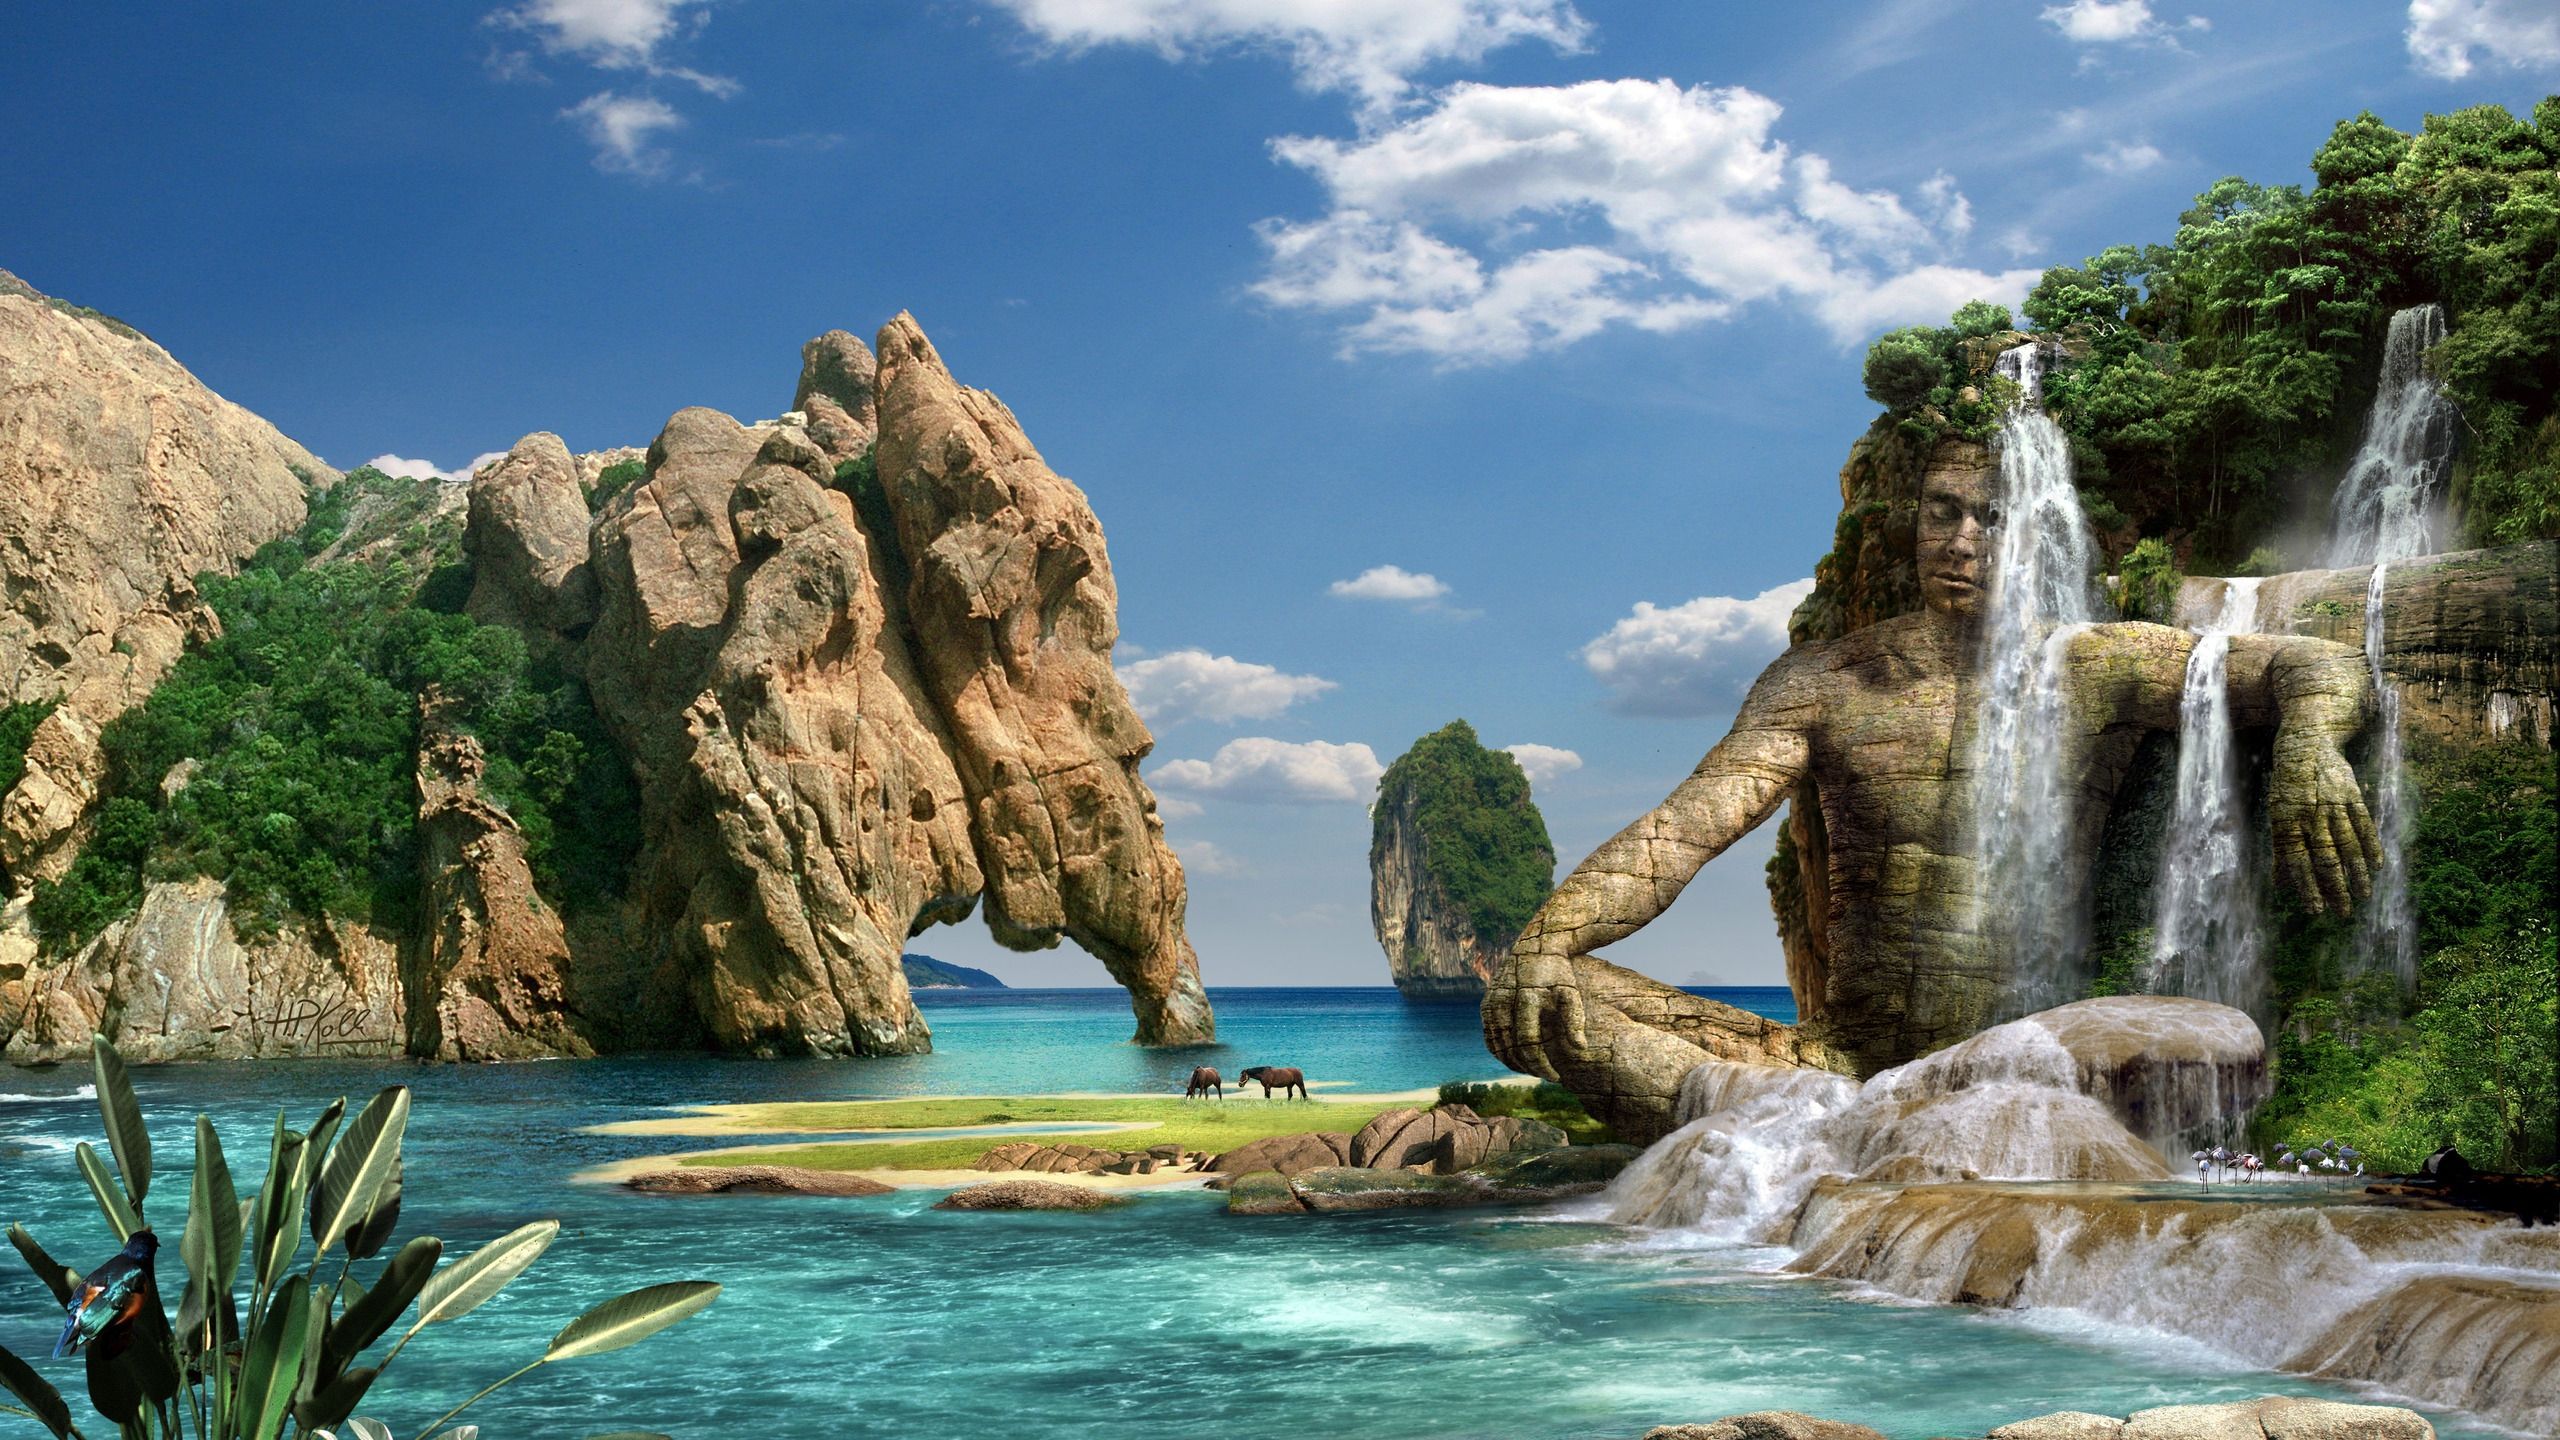 3D Landscape: Fantasy Waterfall, picture nr. 61015